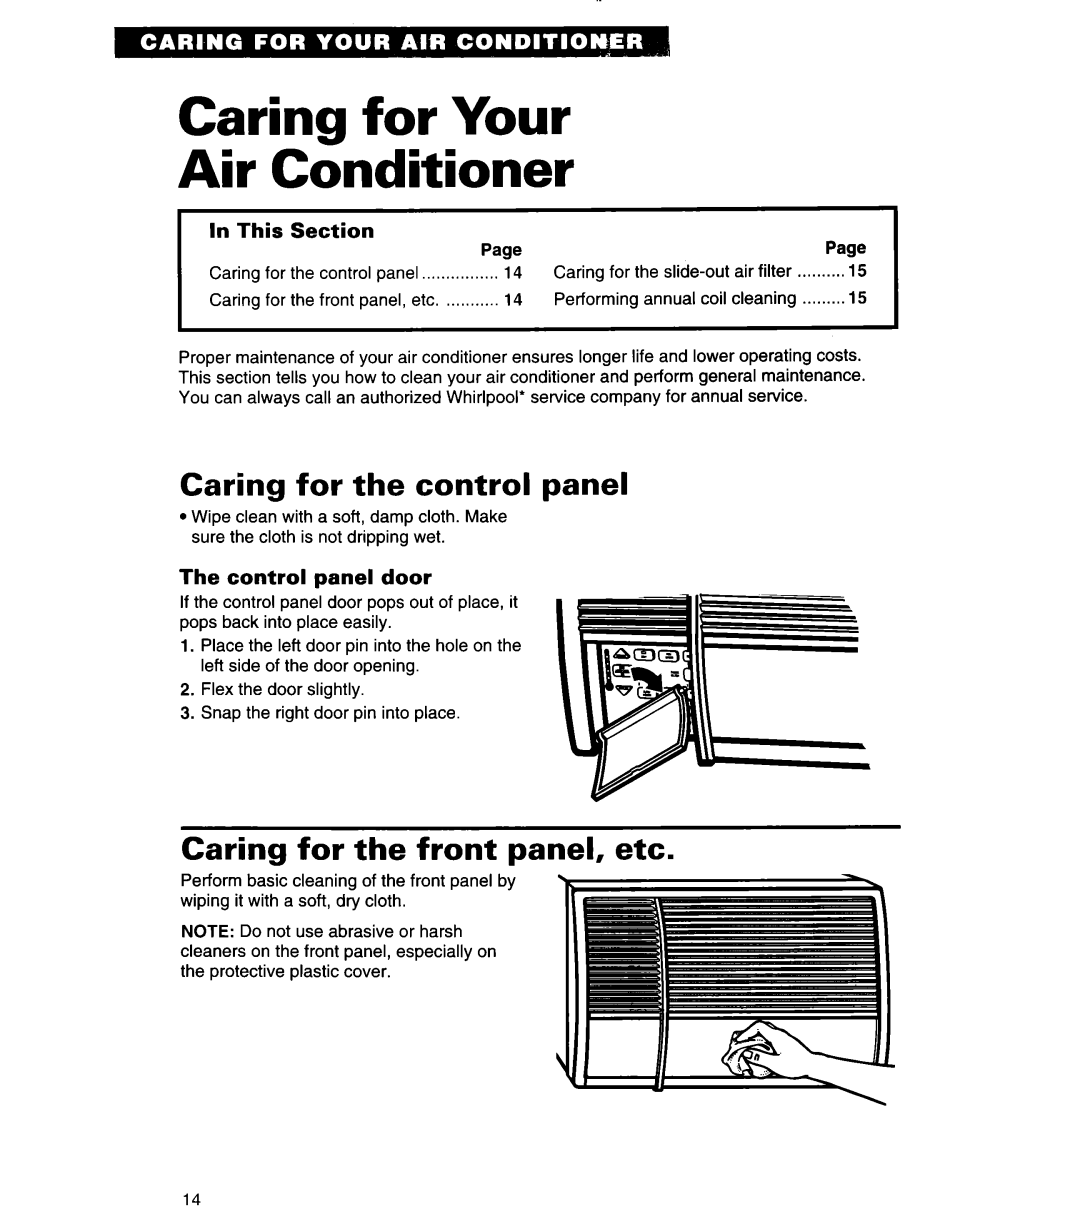 Whirlpool 3PACH21DD0 Caring for Your Air Conditioner, Caring for the control panel, Caring for the front panel, etc 